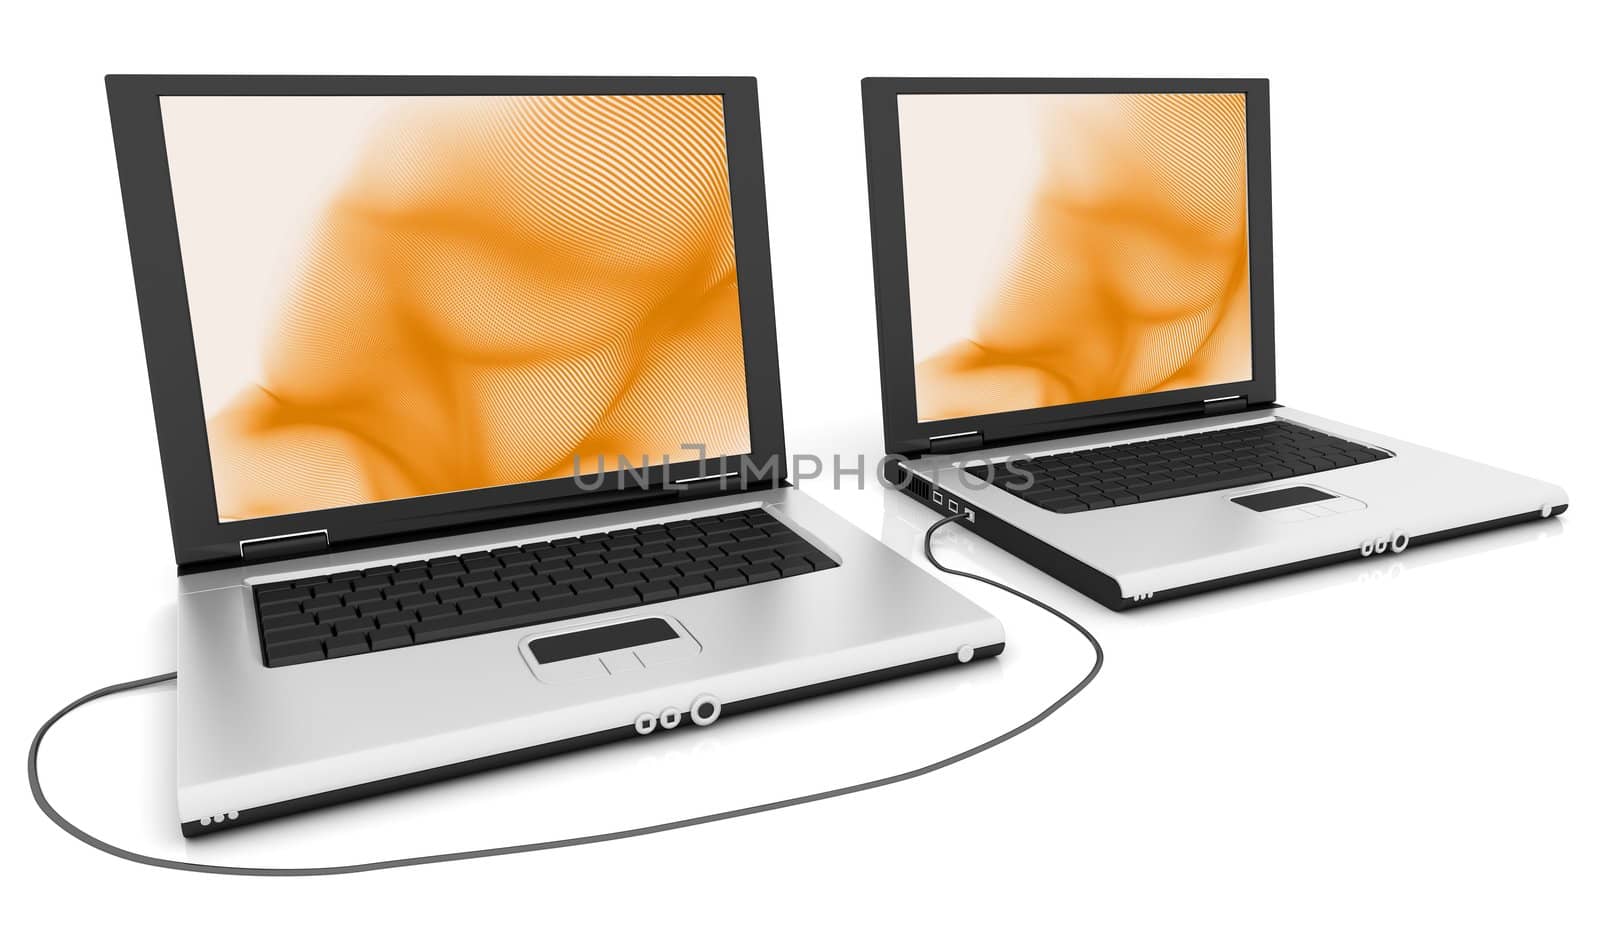 Two computers connected together on isolated background